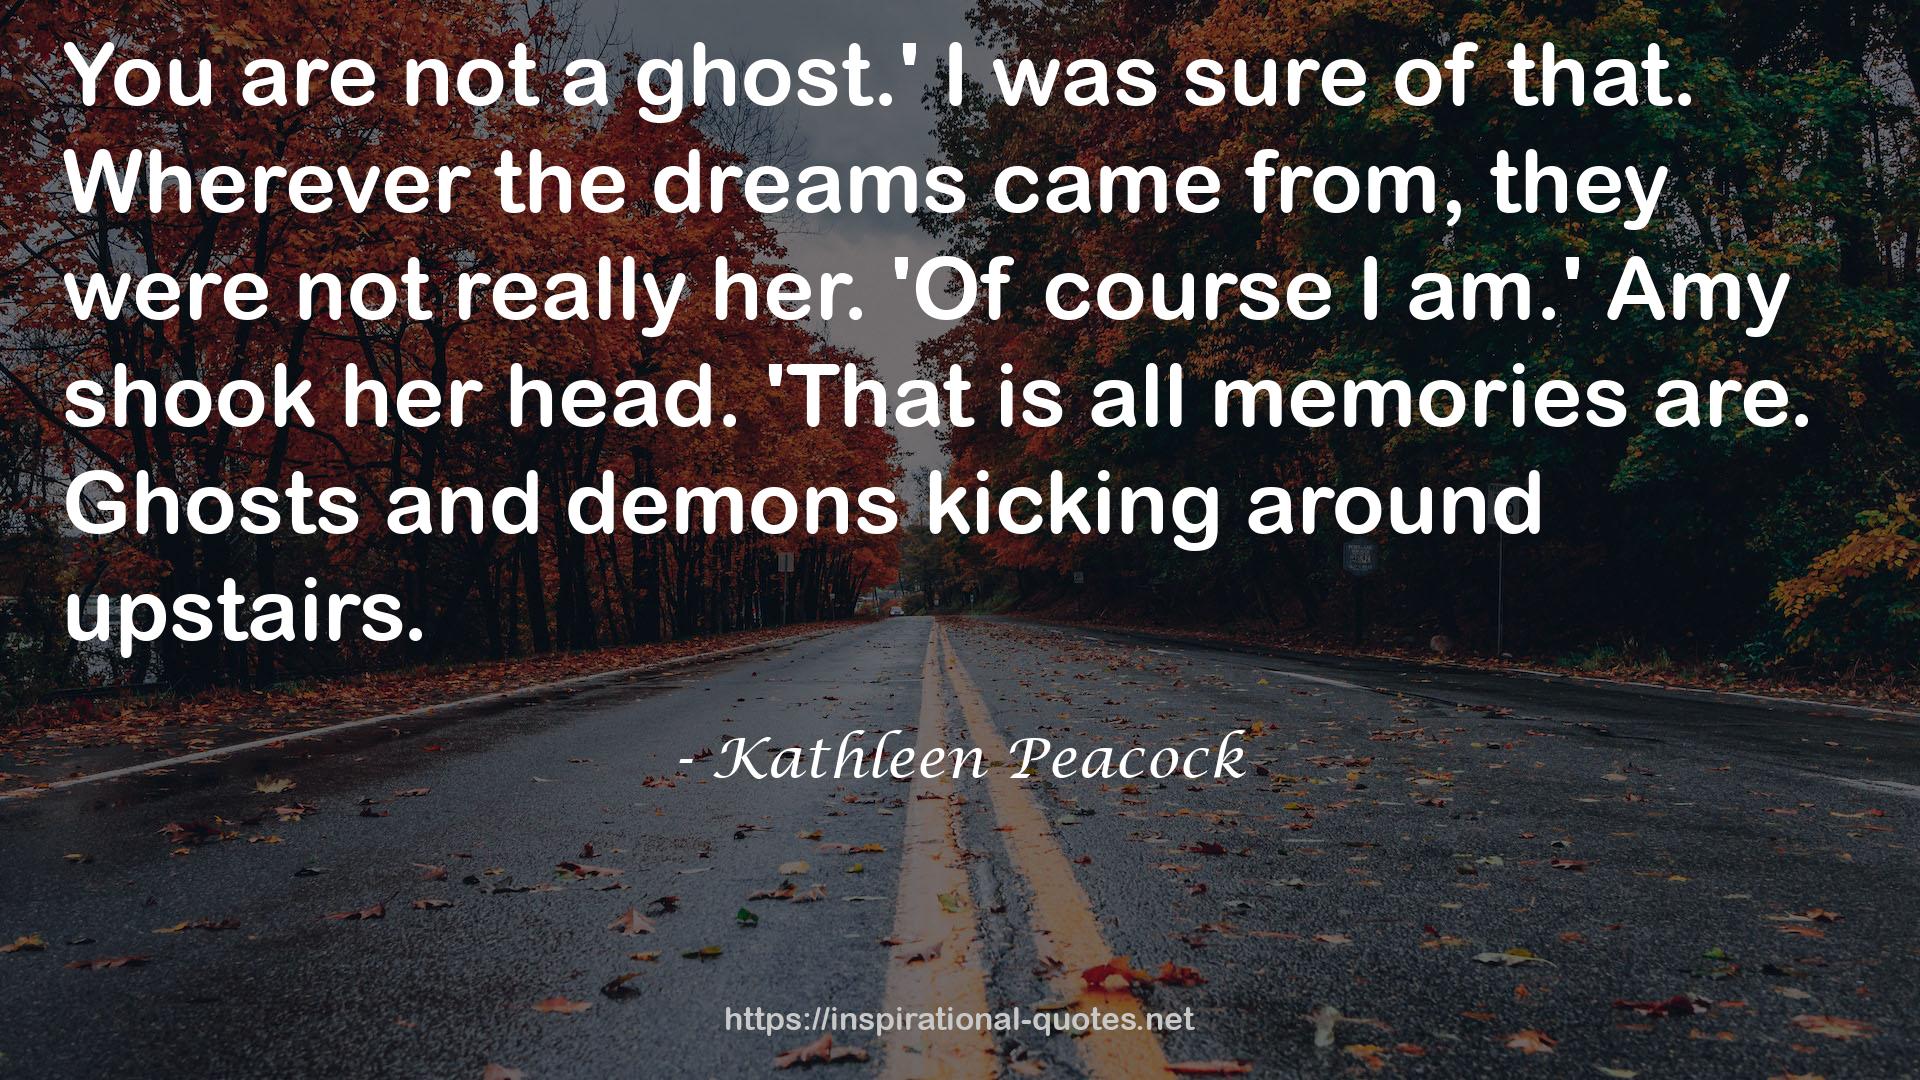 Kathleen Peacock QUOTES